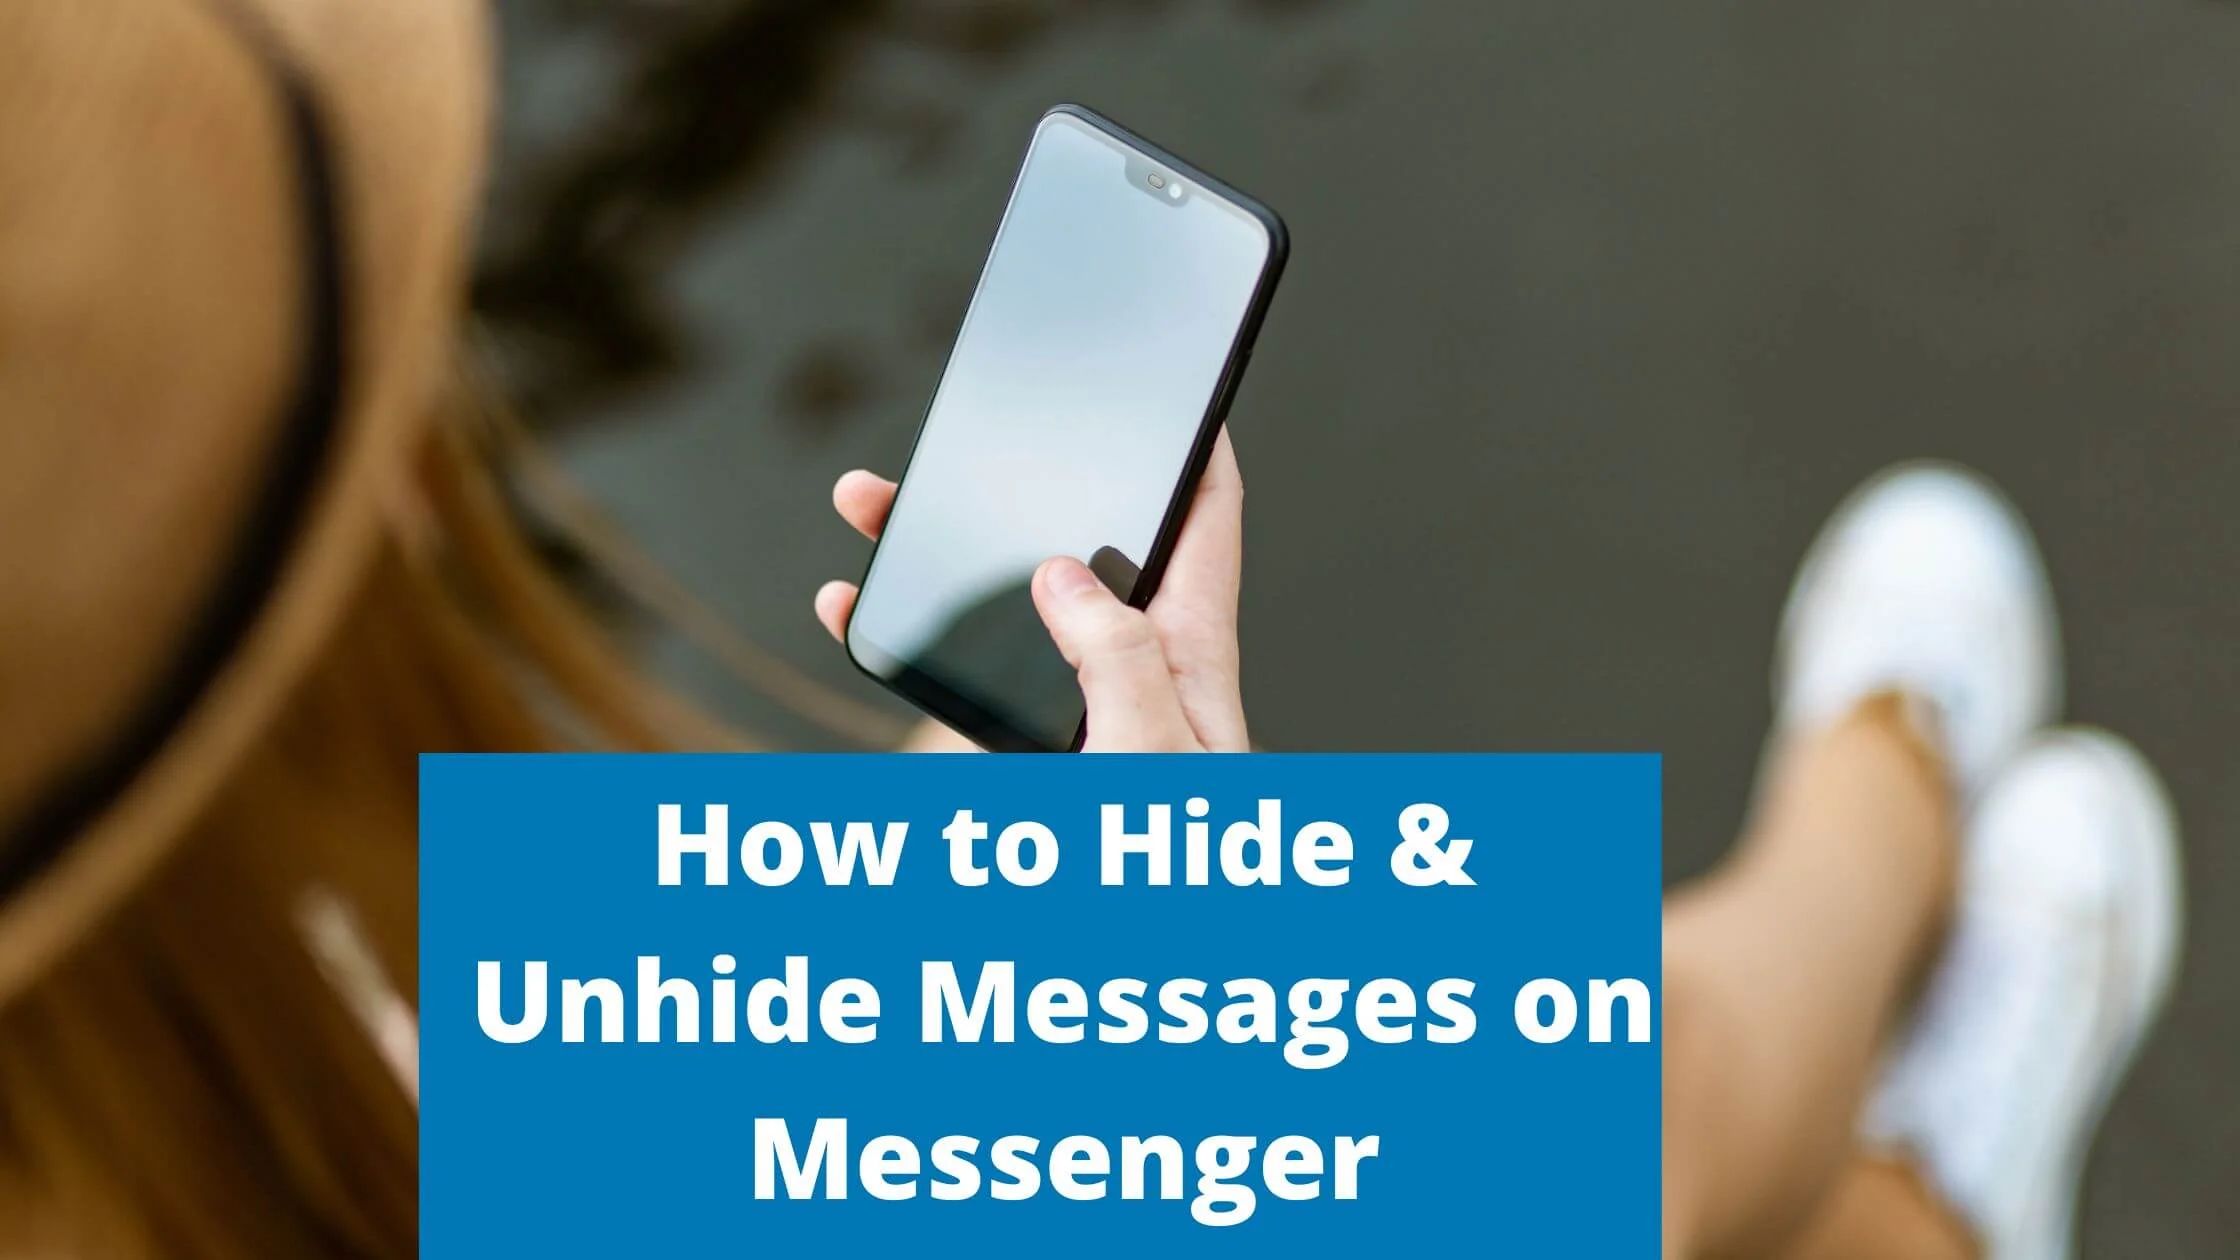 Hide and Unhide Messages on Messenger